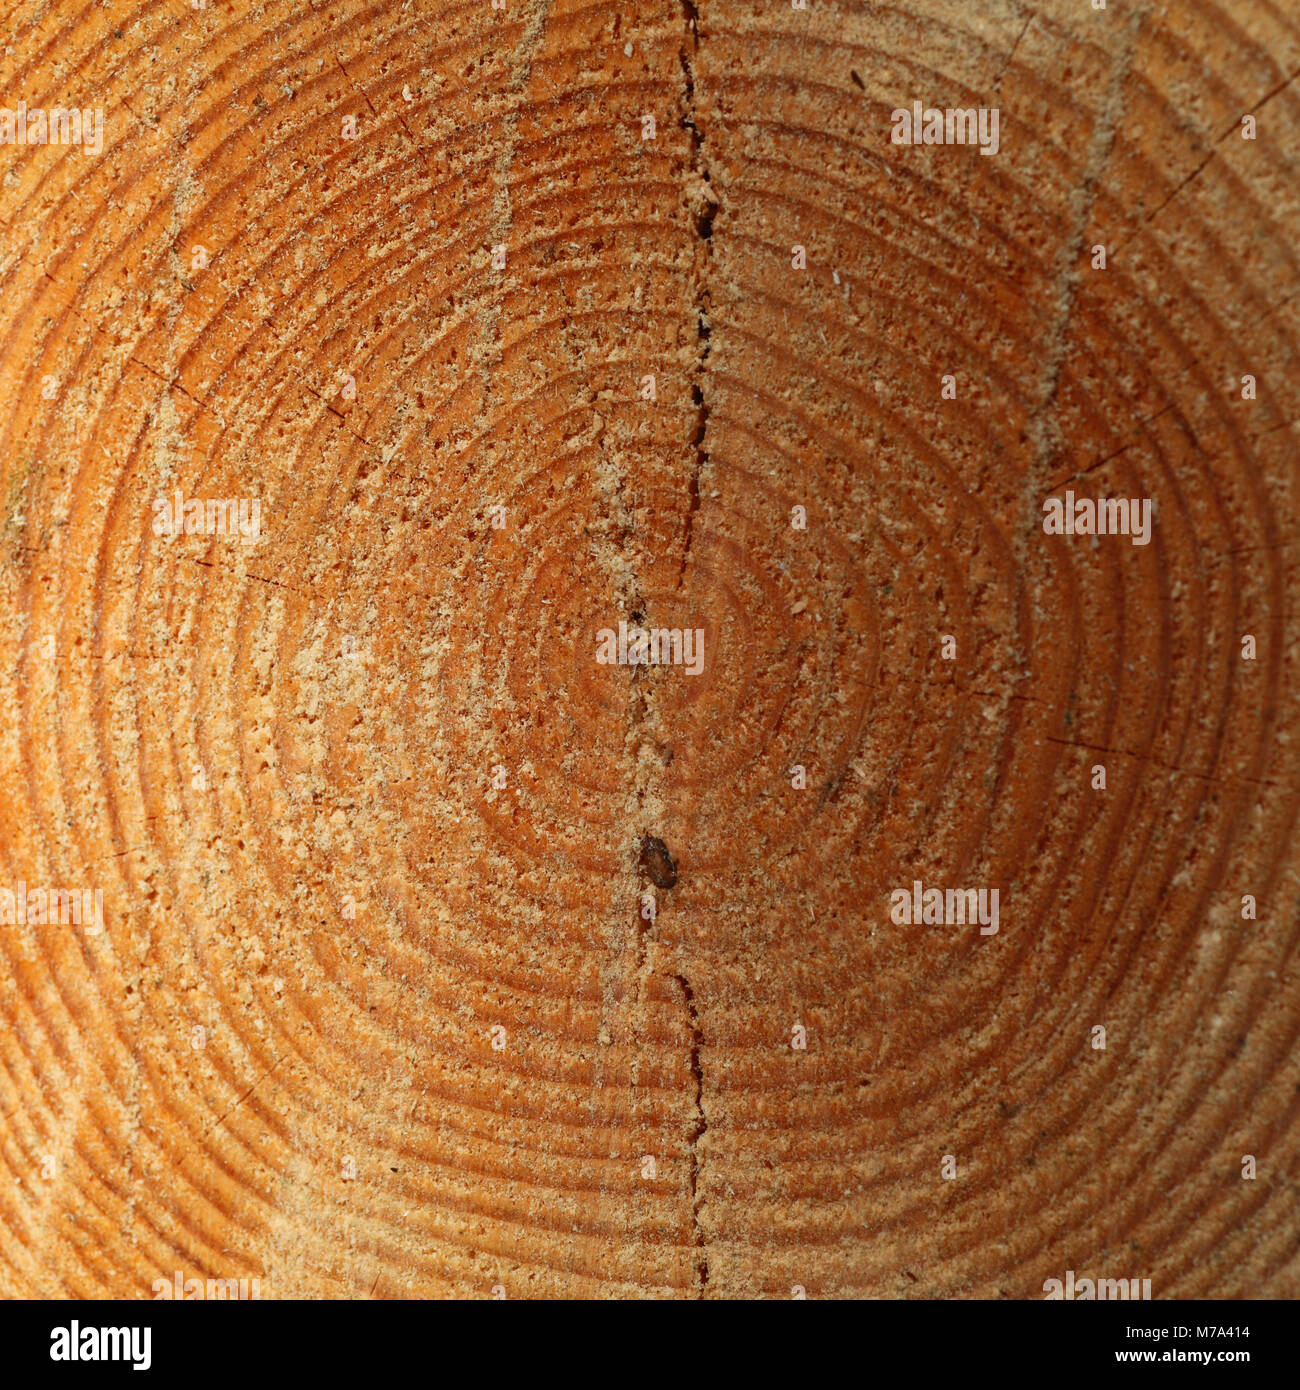 Growth ring - Simple English Wikipedia, the free encyclopedia